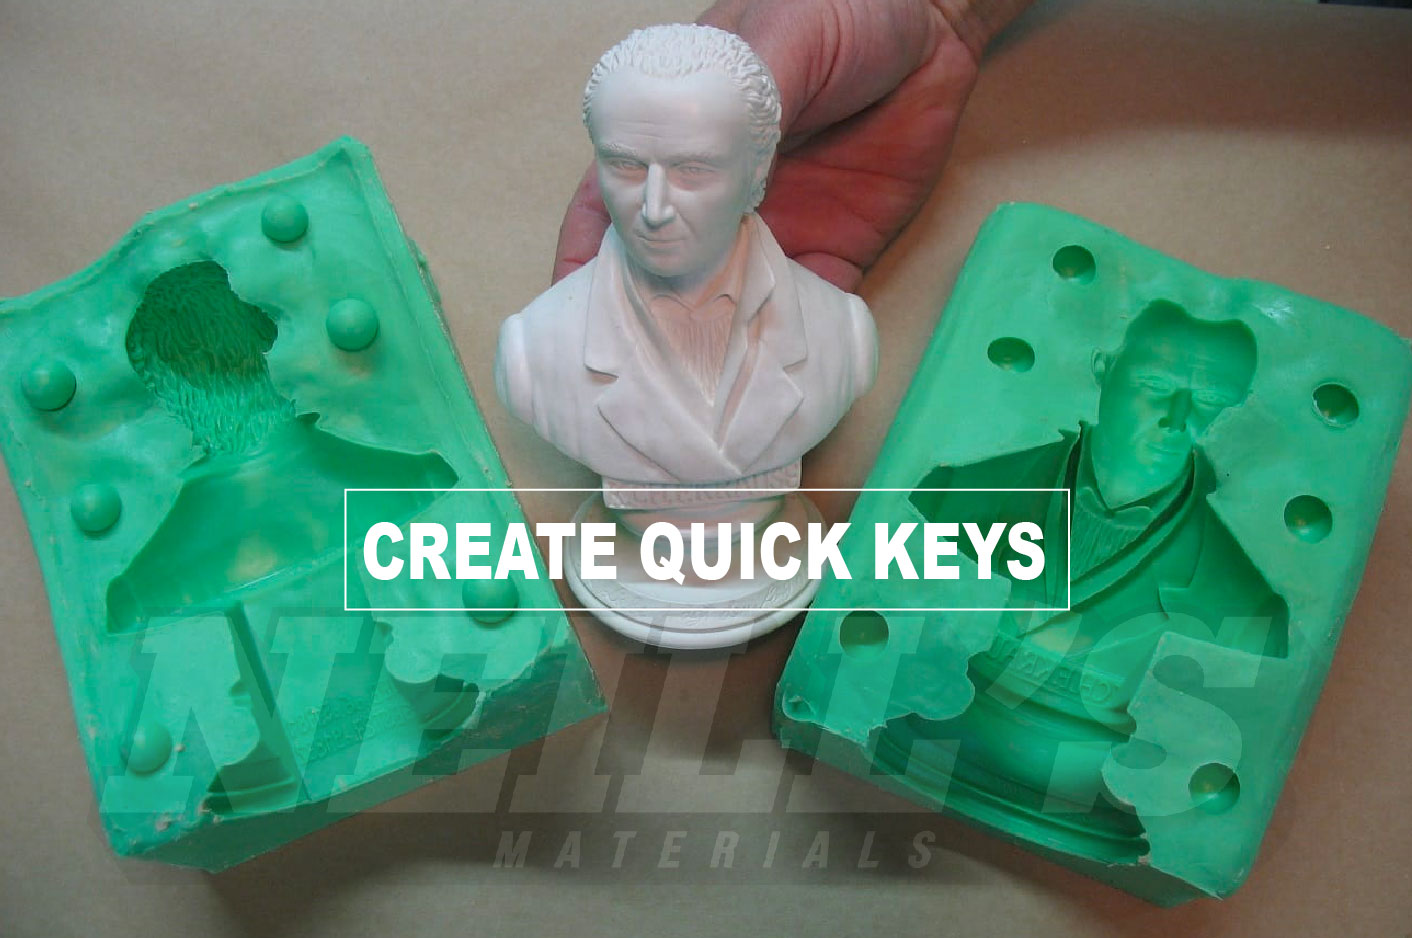 What Can I Use To Make Keys In My Two-Part Mould